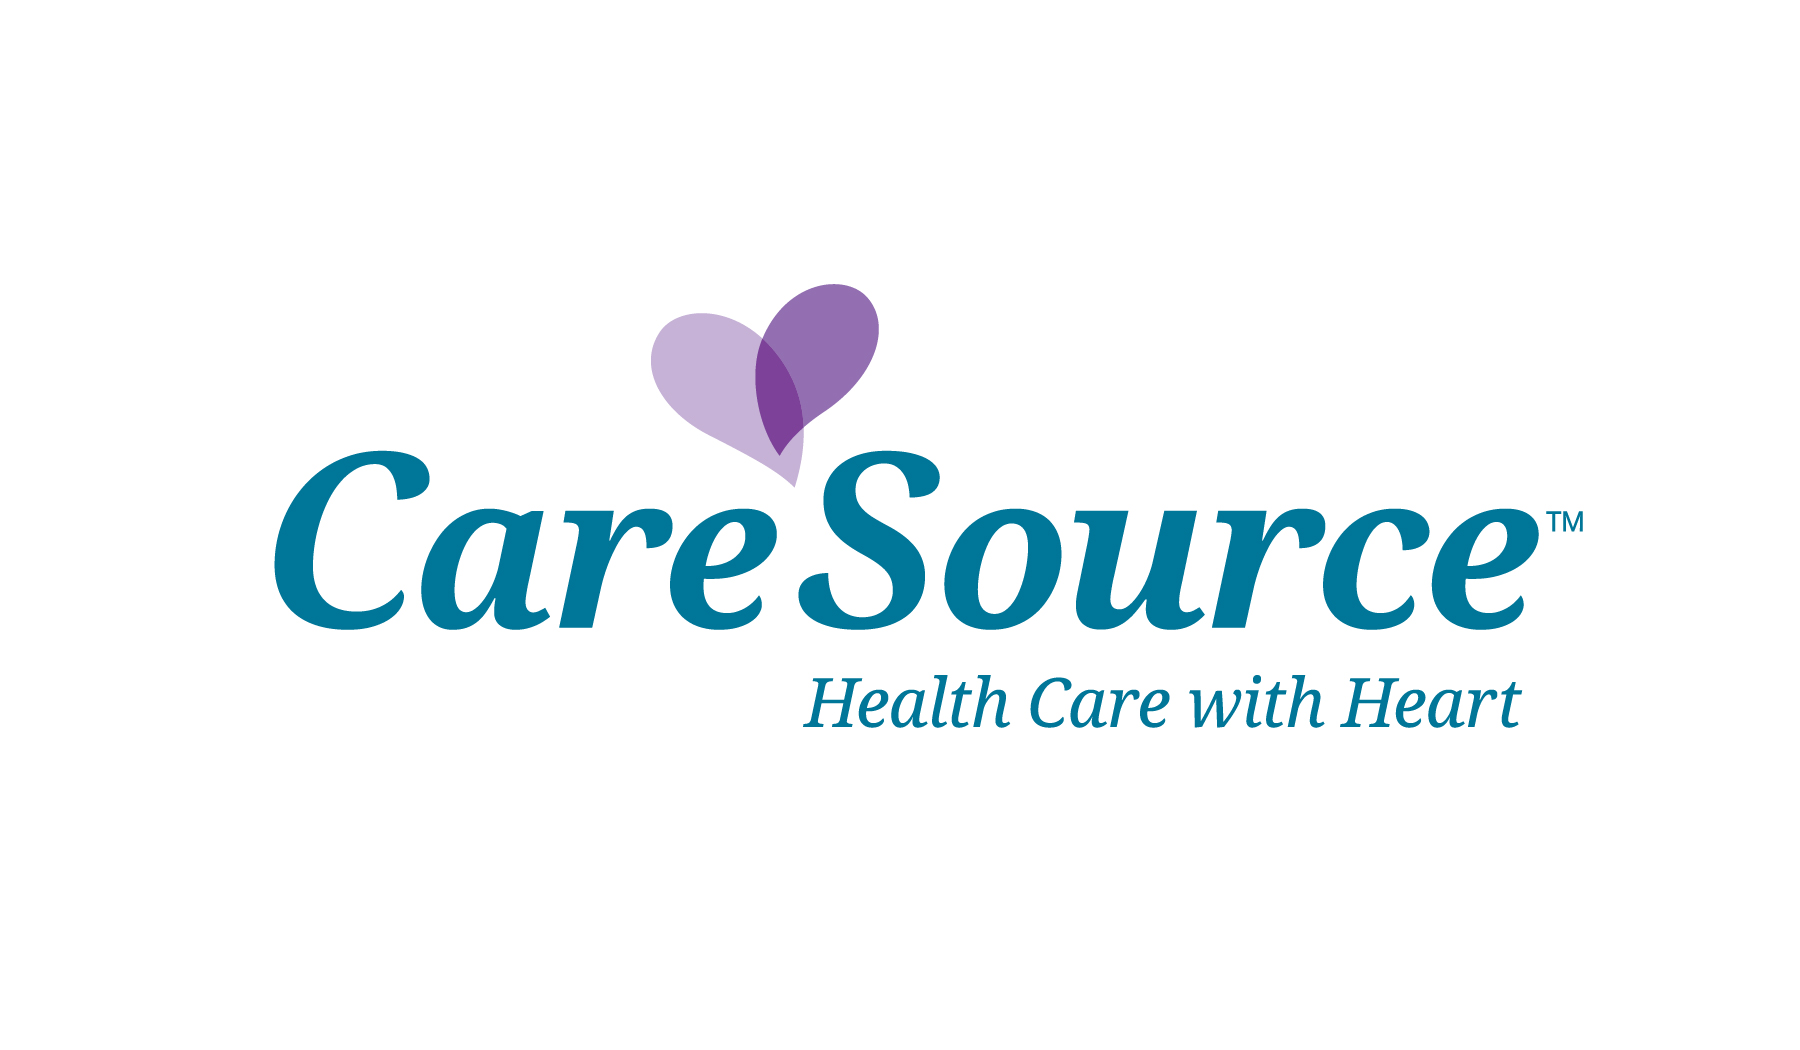 Caresource customer car number dentist in staten island that accept amerigroup